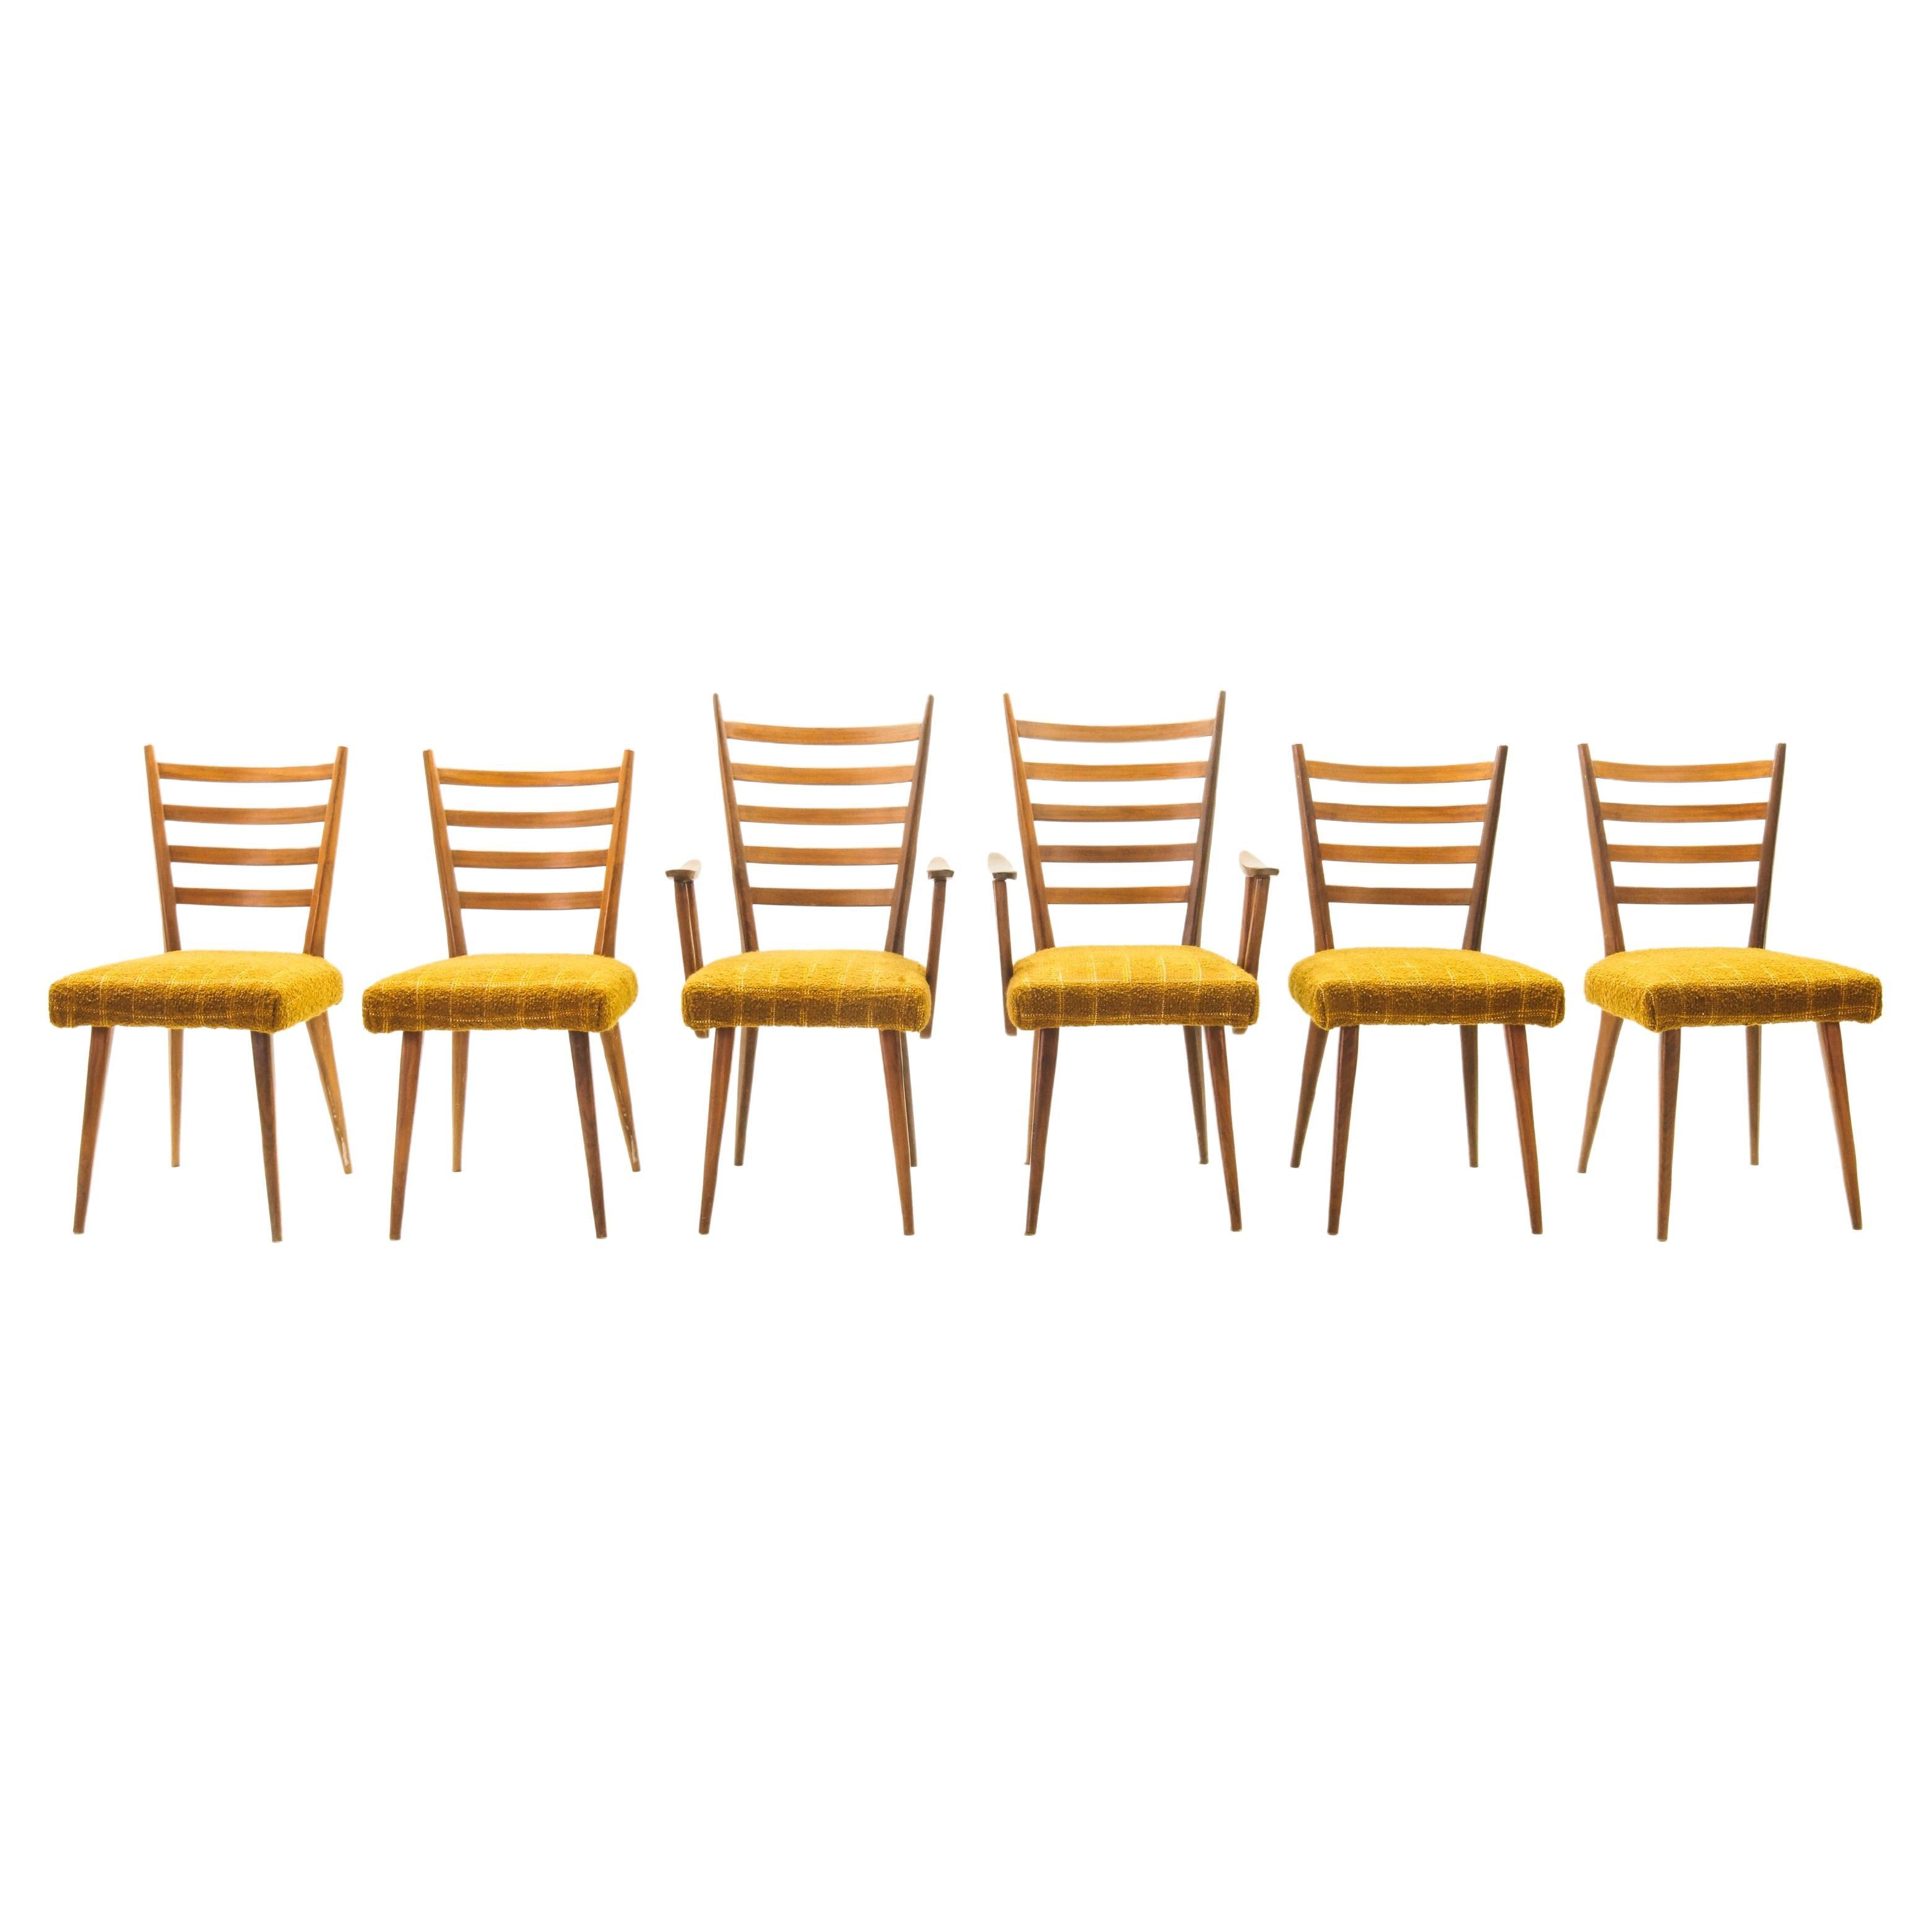 Cees Braakman for Pastoe - Ladder Chairs, 1950's - Dinerset of 6